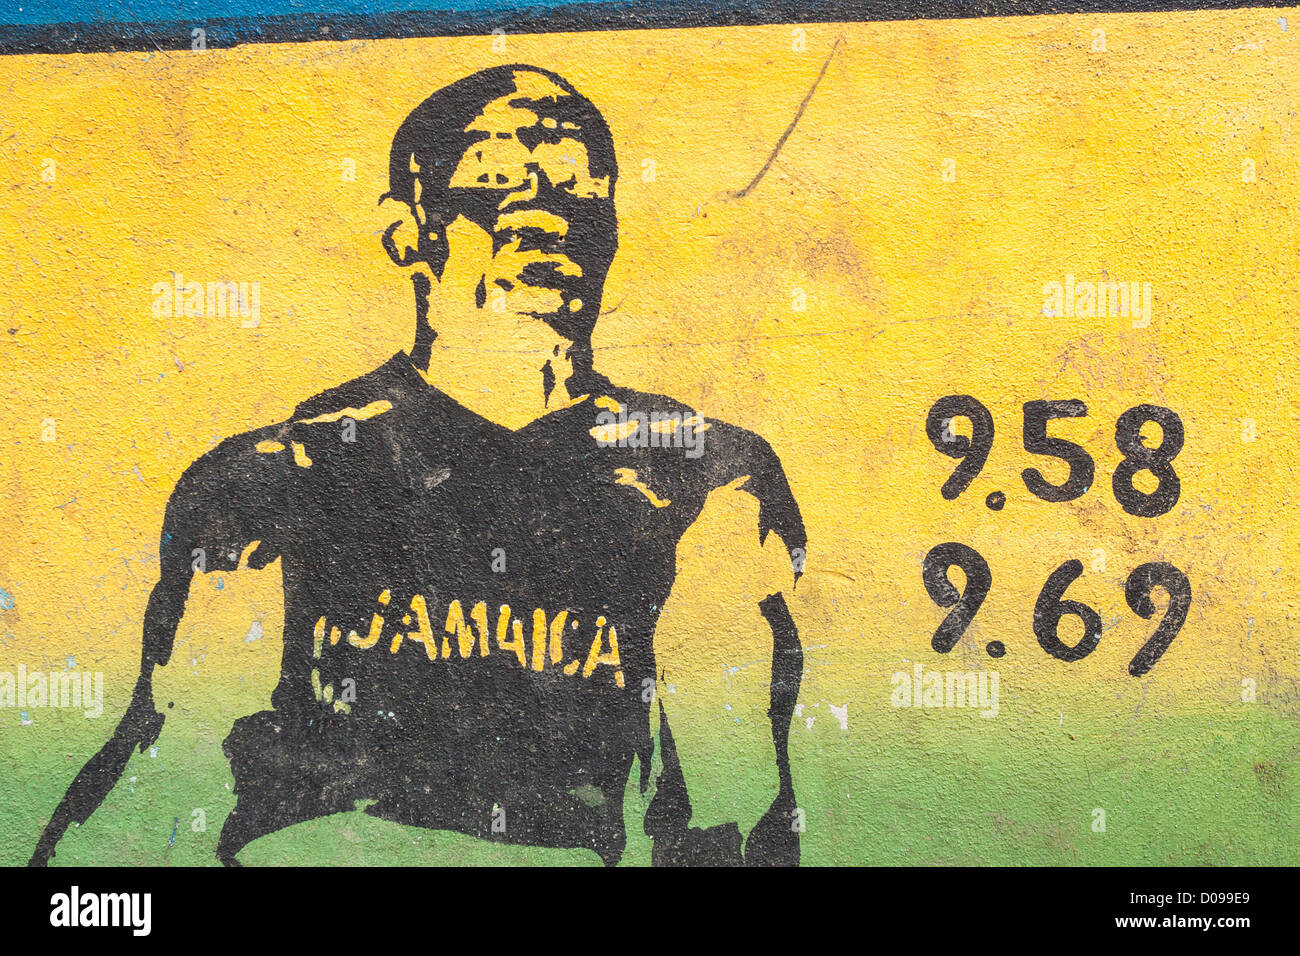 GRAFFITI SHOWING JAMAICAN SPRINTER USAIN BOLT HIS TWO WORLD RECORDS IN 100 METERS TOWN CENTRE PORT ANTONIO JAMAICA CARIBBEAN Stock Photo